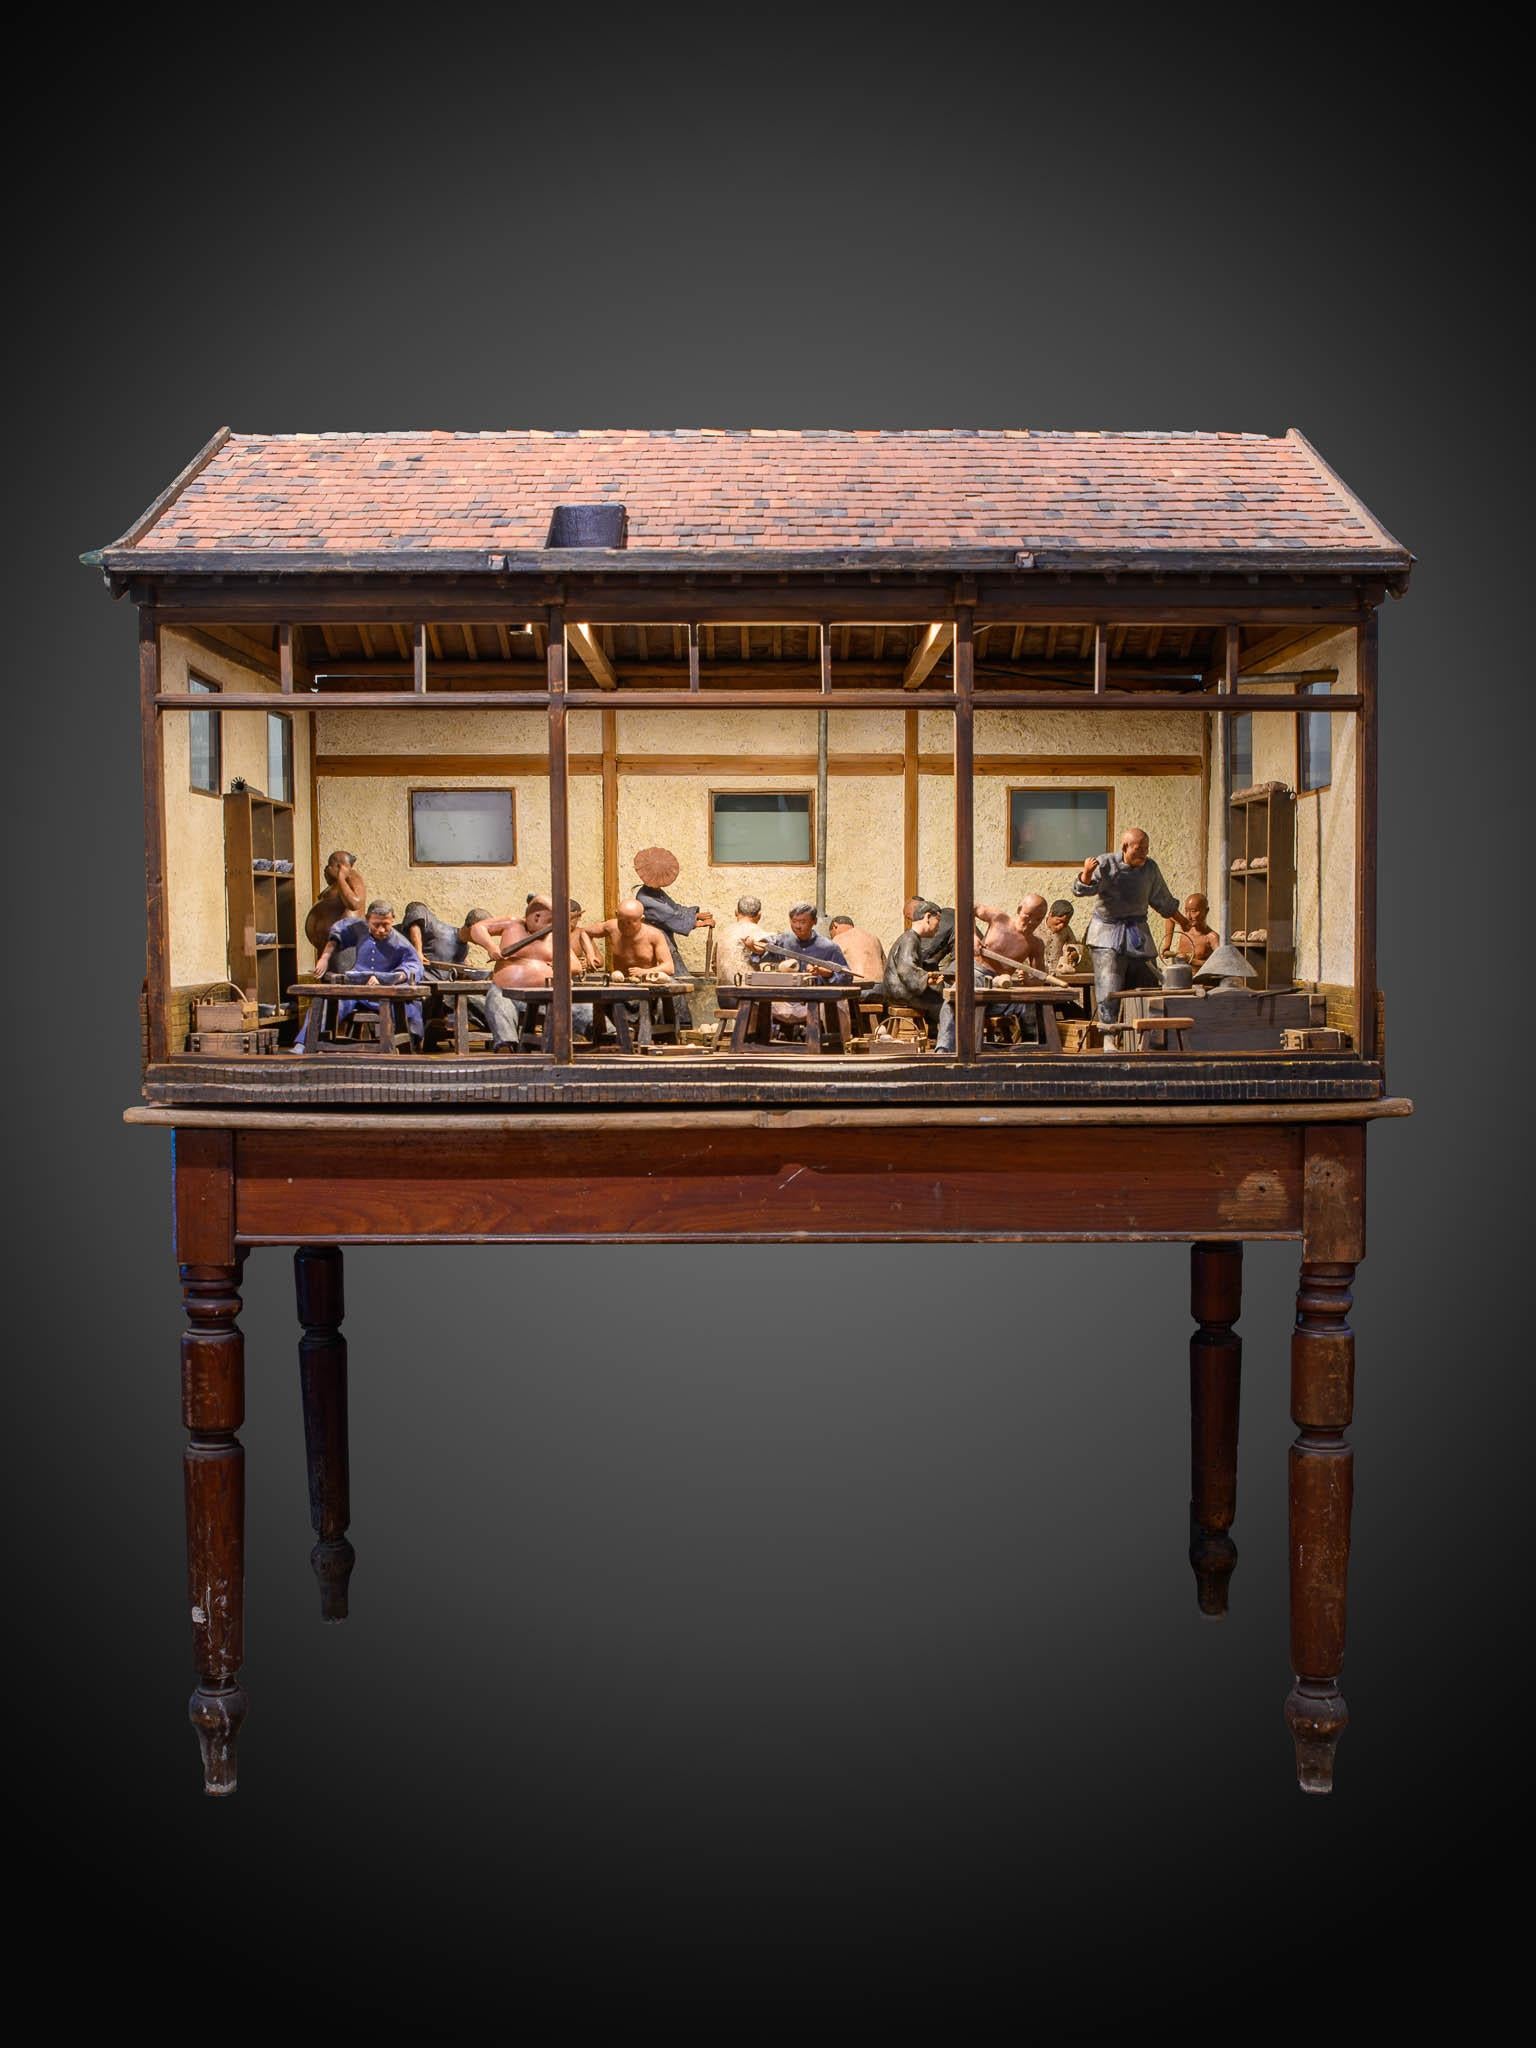 Terracotta Chinese 19 th C Workshop-Scaled model with 17 polychromed figures.World exhibit For Sale